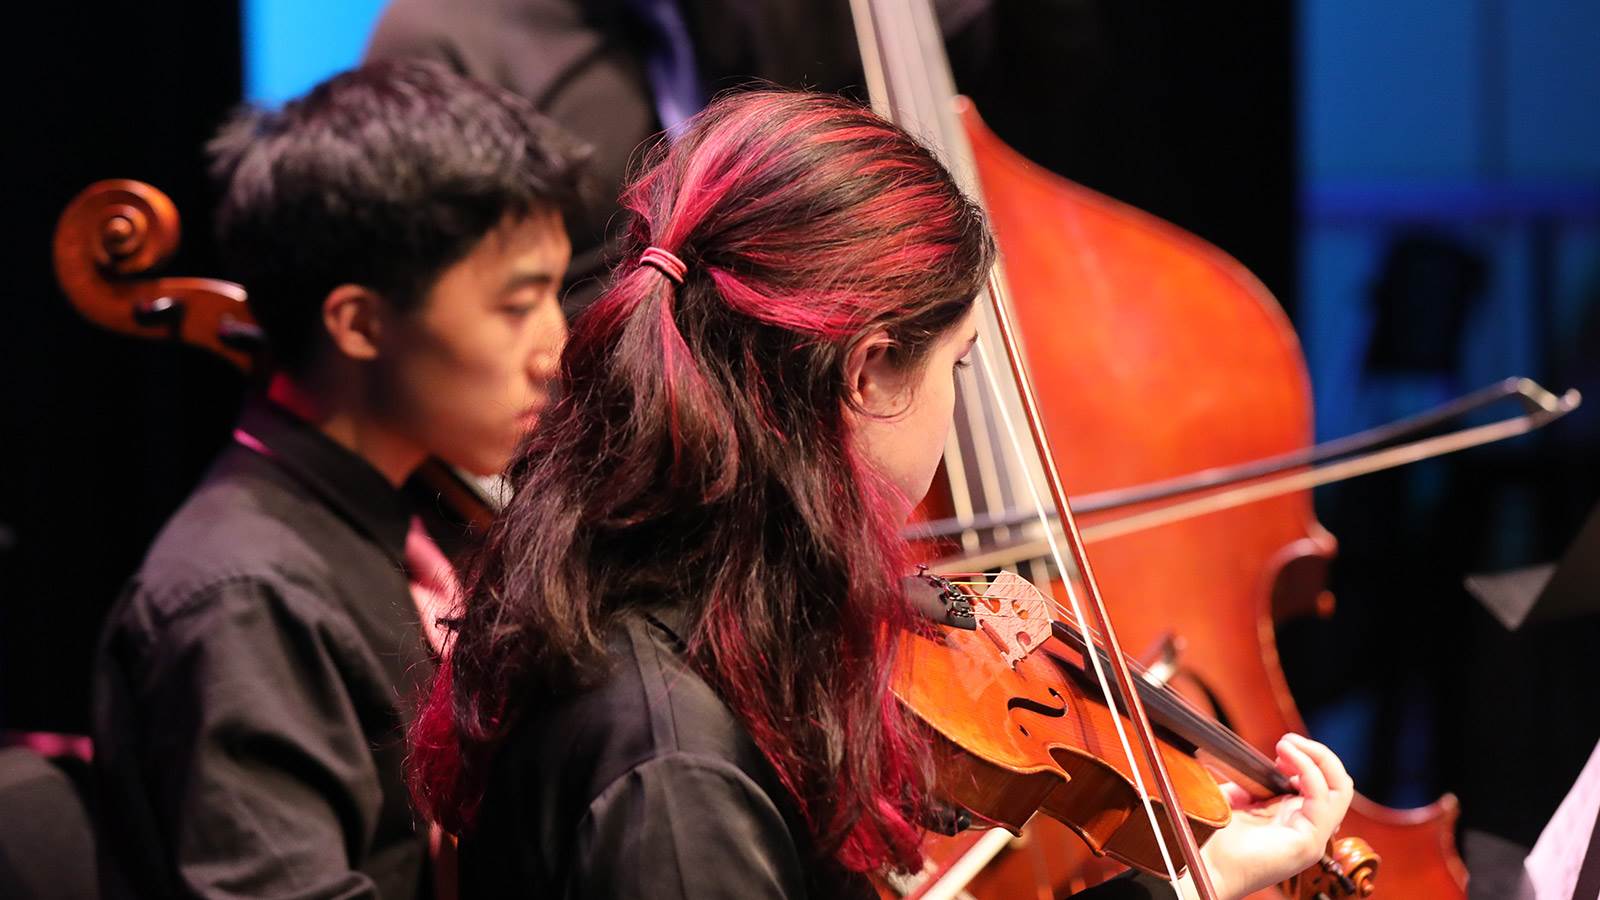 Young musicians playing their instruments. One the right is a young lady playing the violin and on her left is a young man playing a cello.